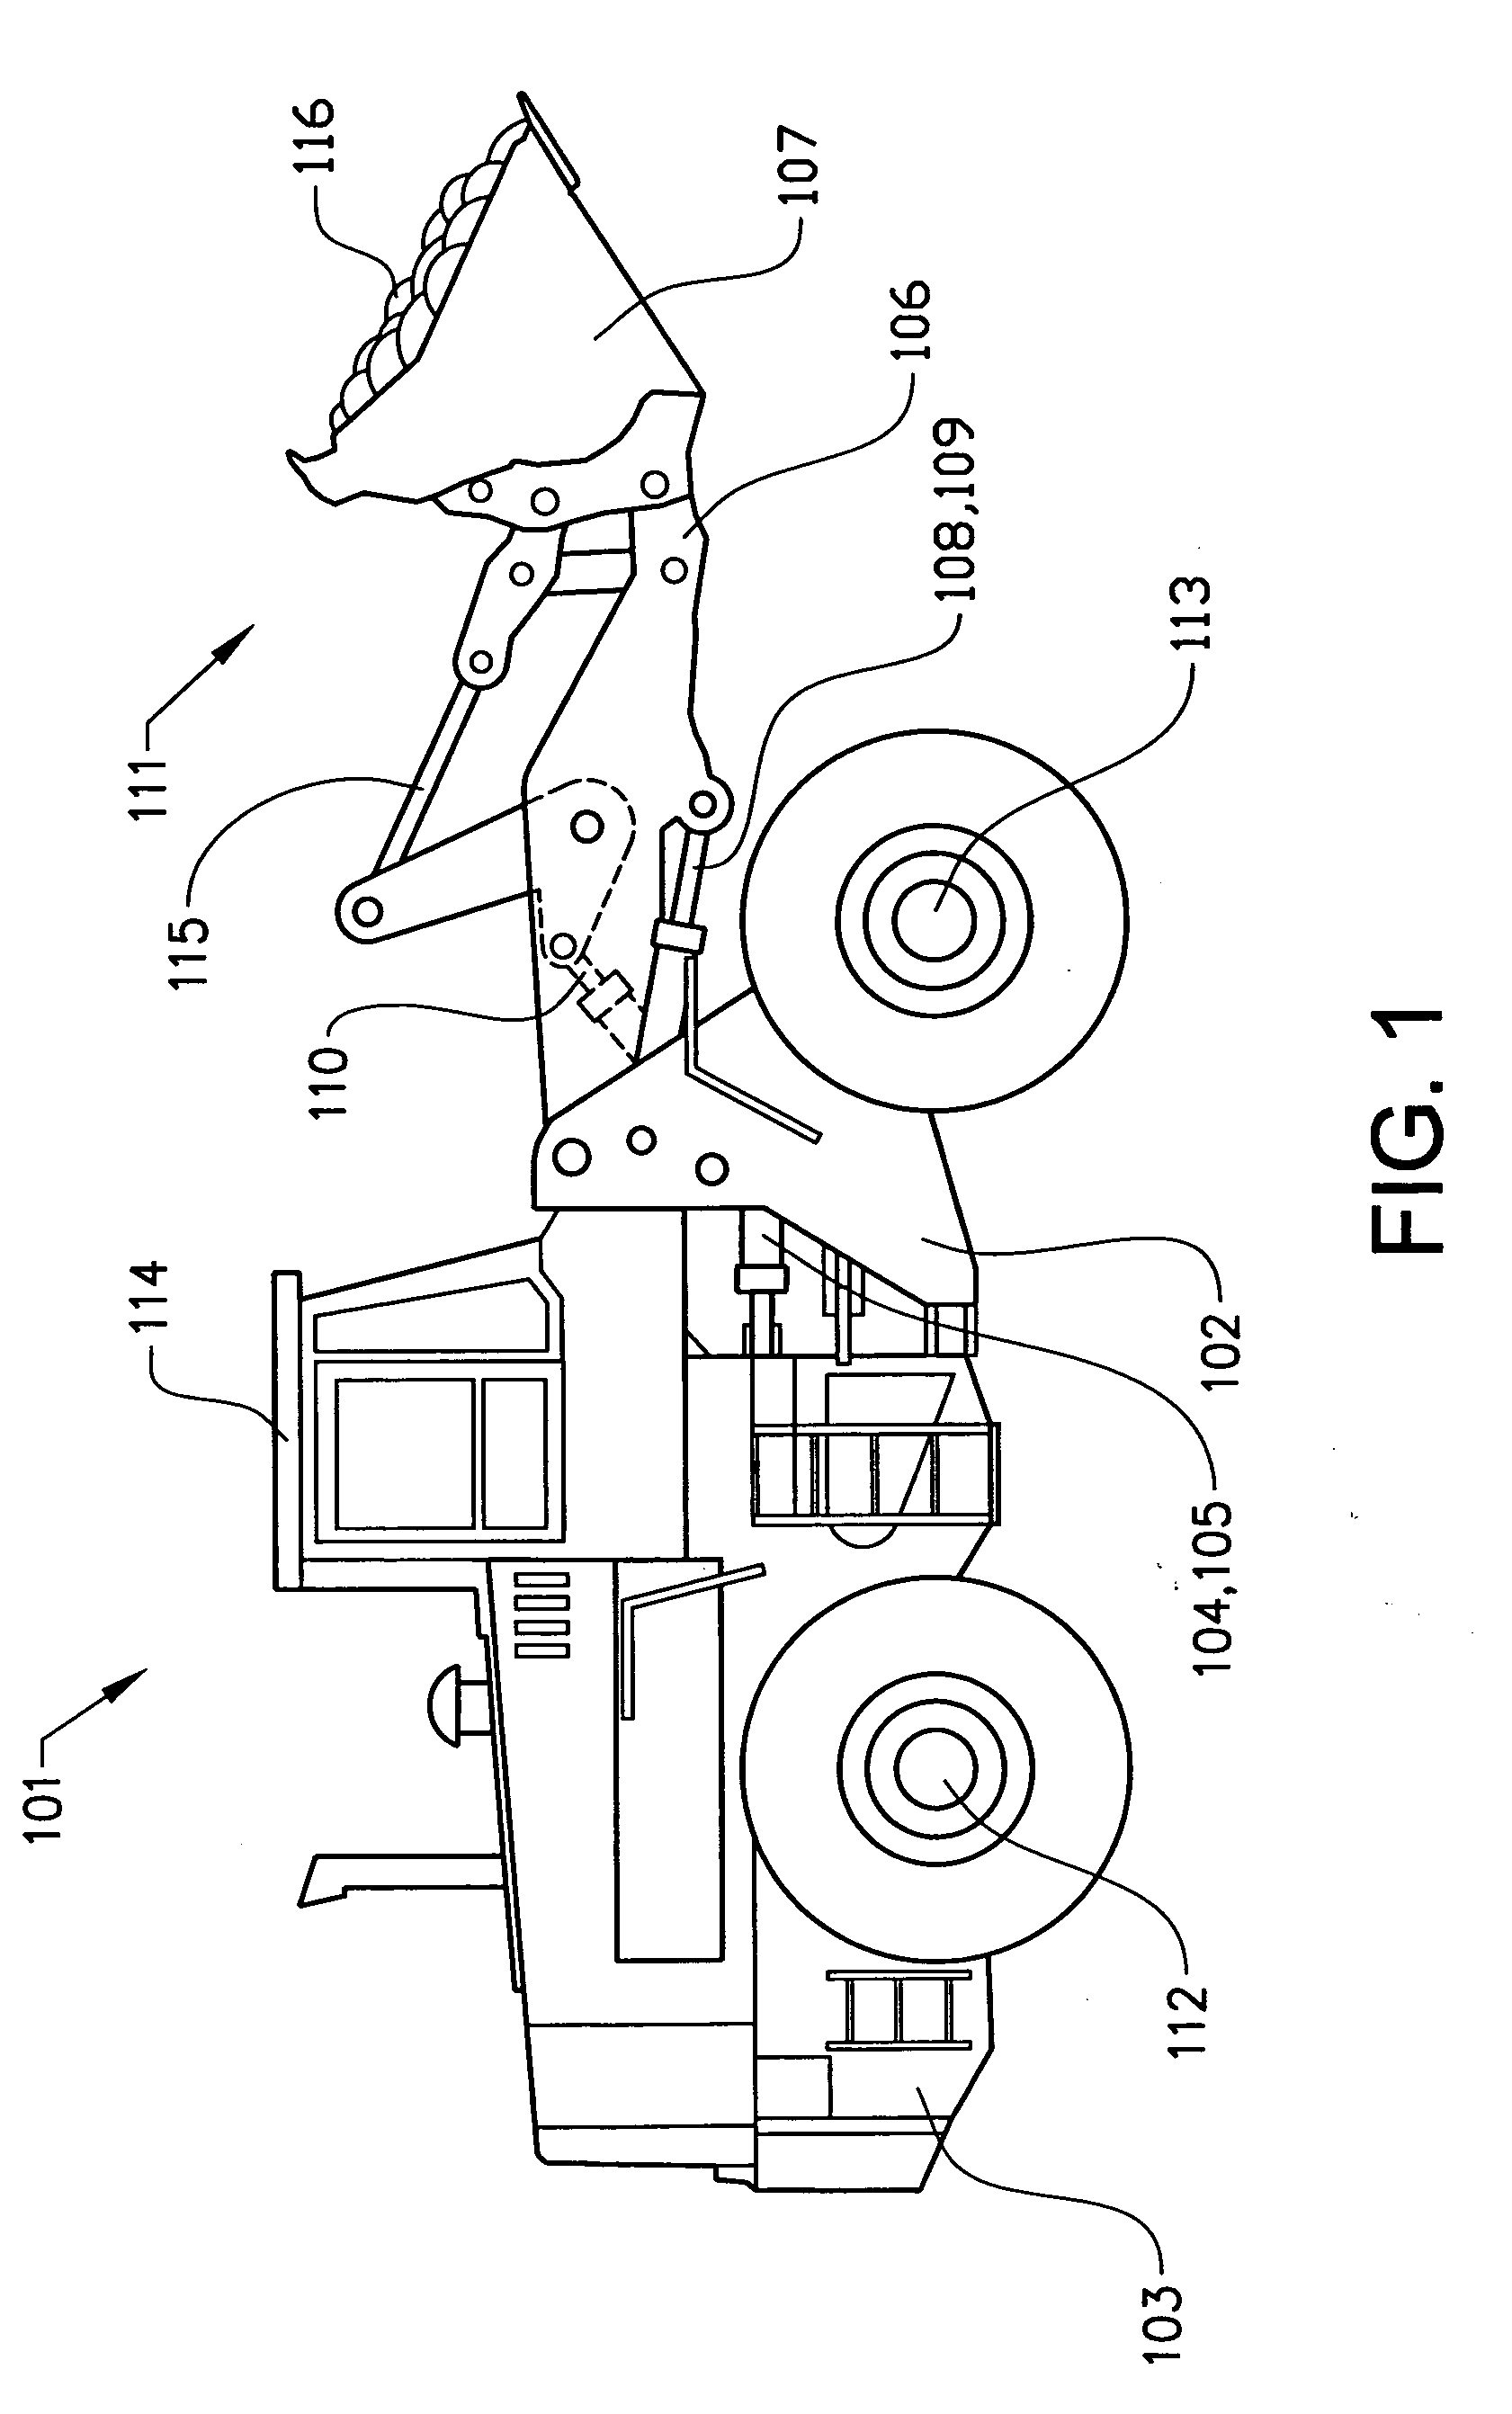 Method for controlling a work machine during operation in a repeated work cycle